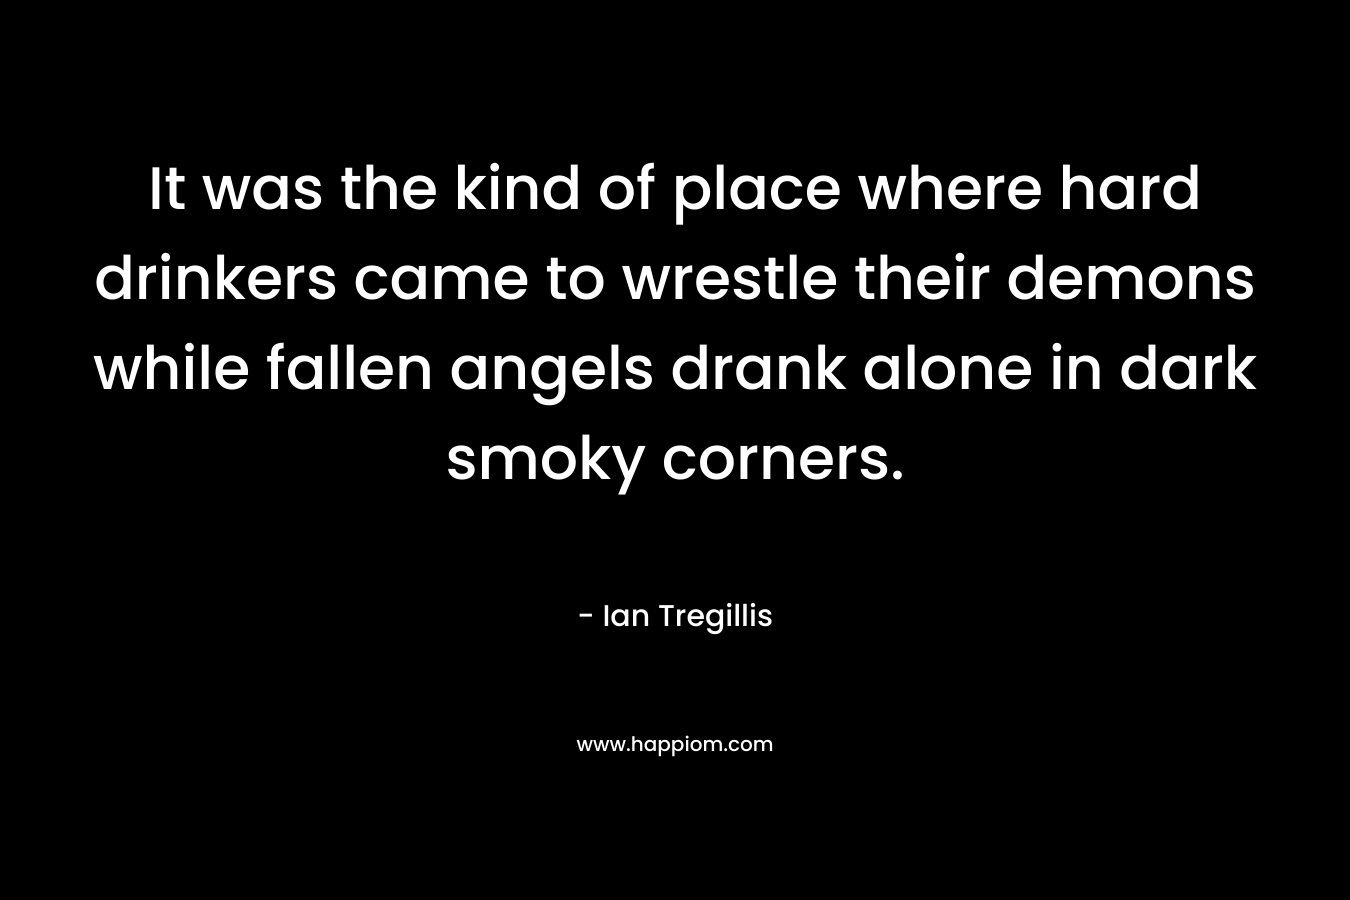 It was the kind of place where hard drinkers came to wrestle their demons while fallen angels drank alone in dark smoky corners. – Ian Tregillis